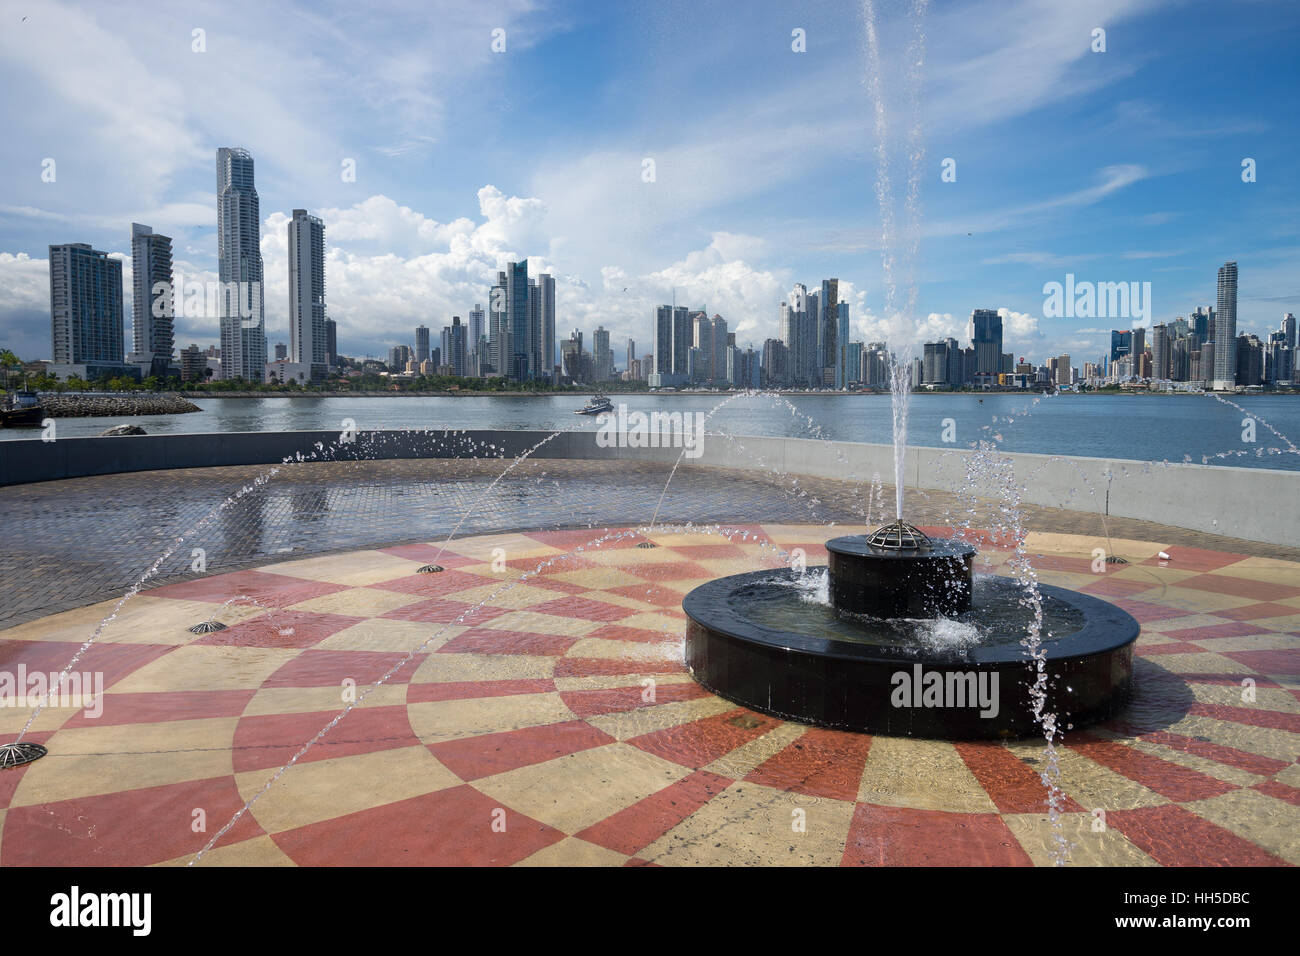 June 15, 2016 Panama City, Panama:  water fountain in the scorching heat of the midday sun with high-rises Stock Photo